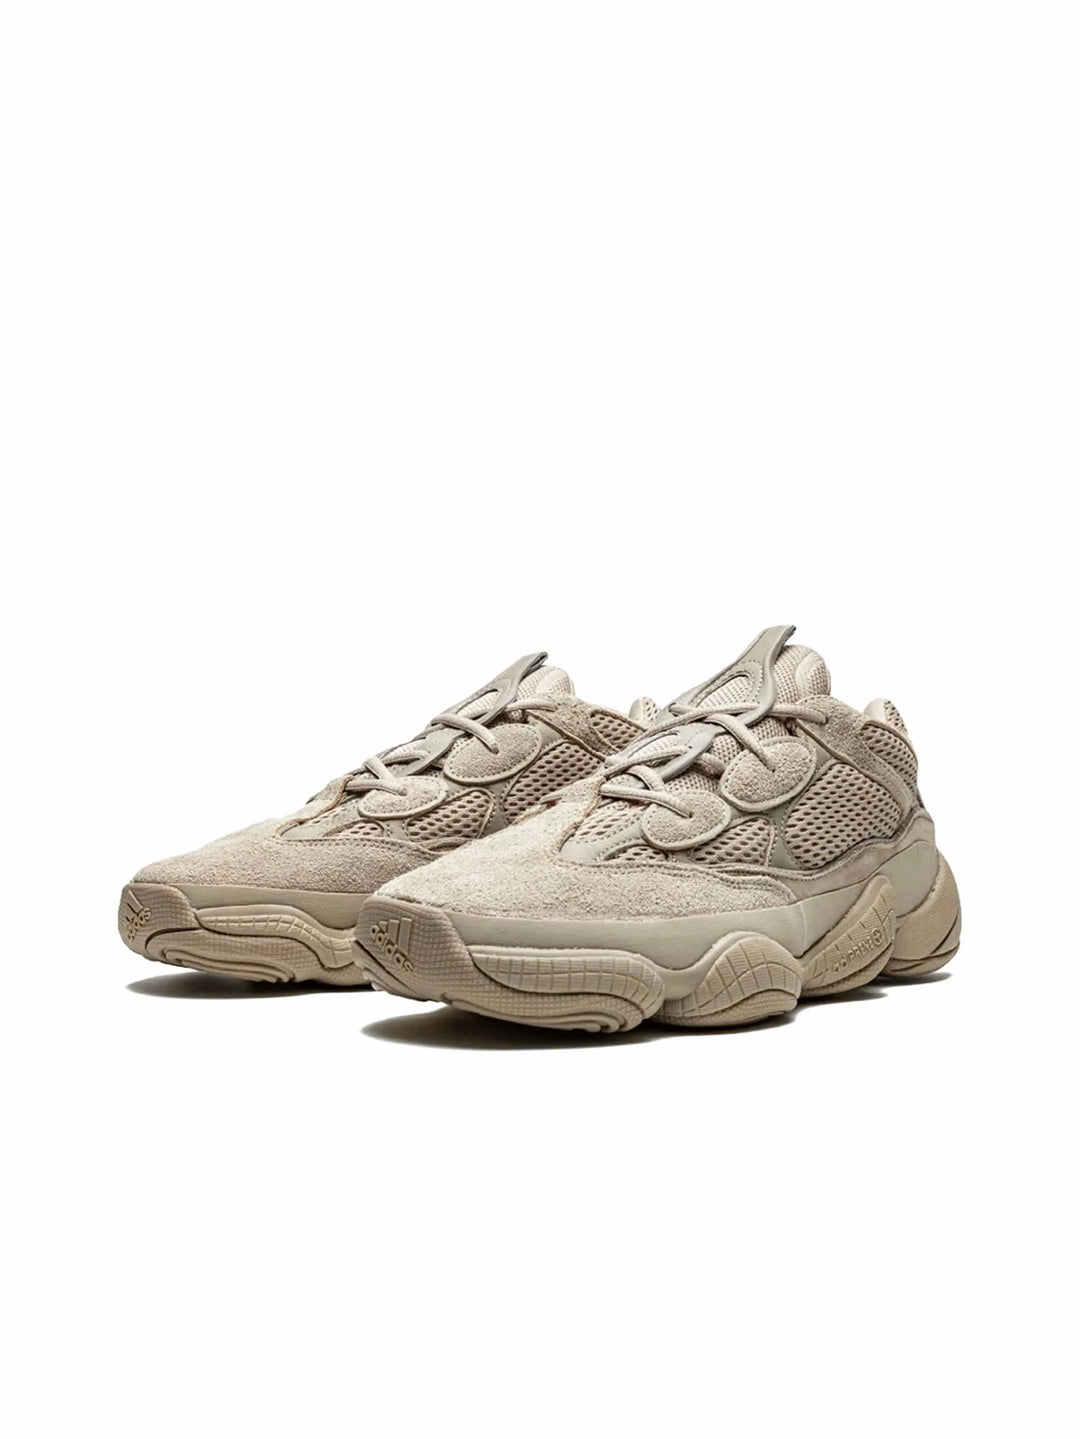 Adidas Yeezy 500 Taupe Light in Auckland, New Zealand - Shop name